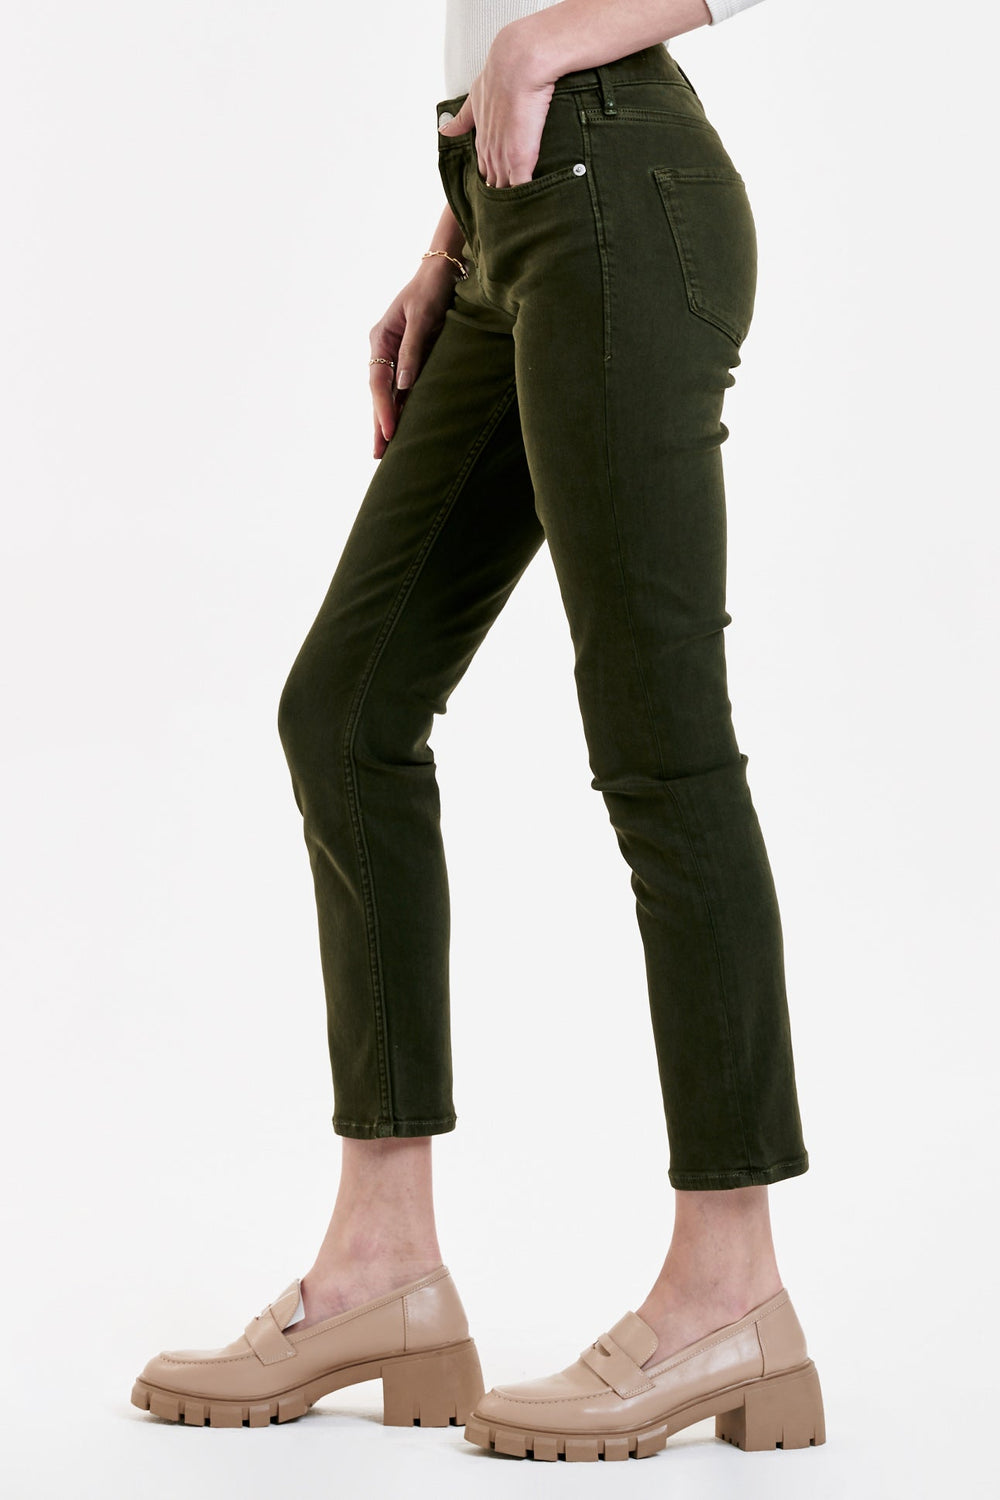 image of a female model wearing a BLAIRE HIGH RISE ANKLE SLIM STRAIGHT JEANS PINE JEANS